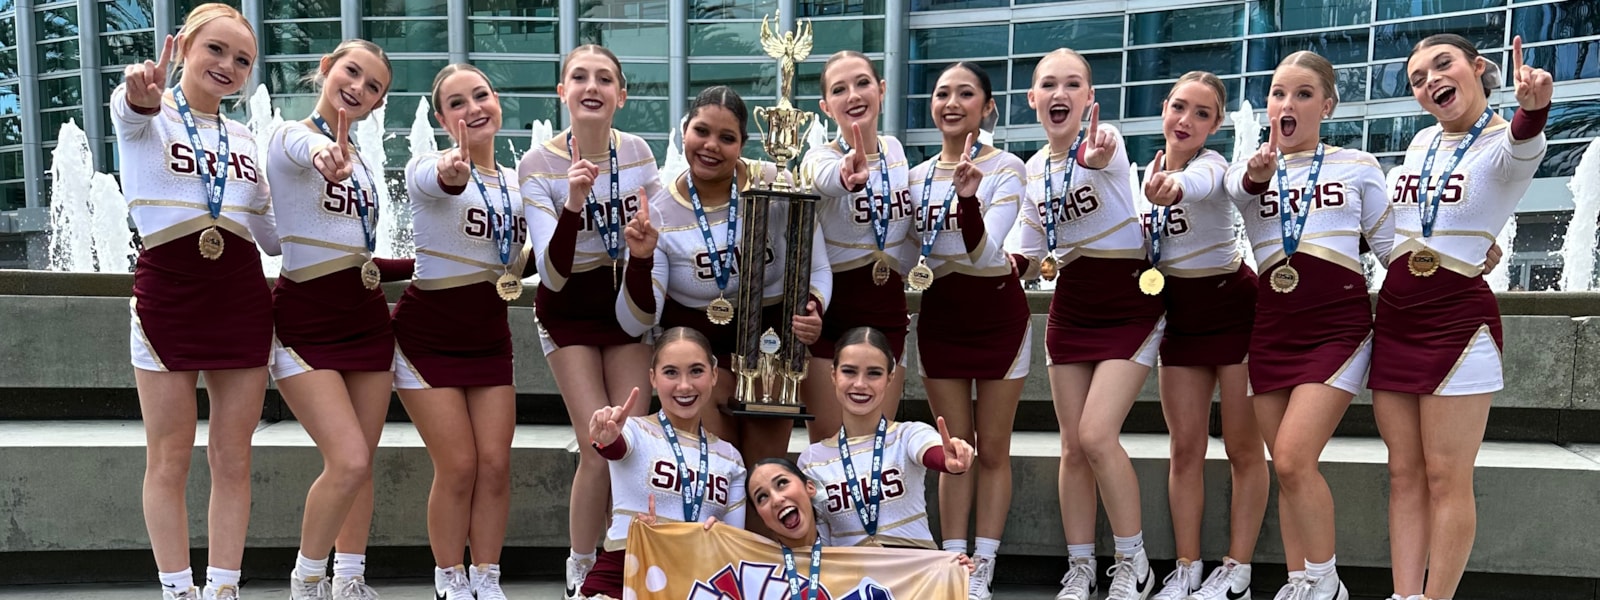 Pom team wearing medals and holding a trophy